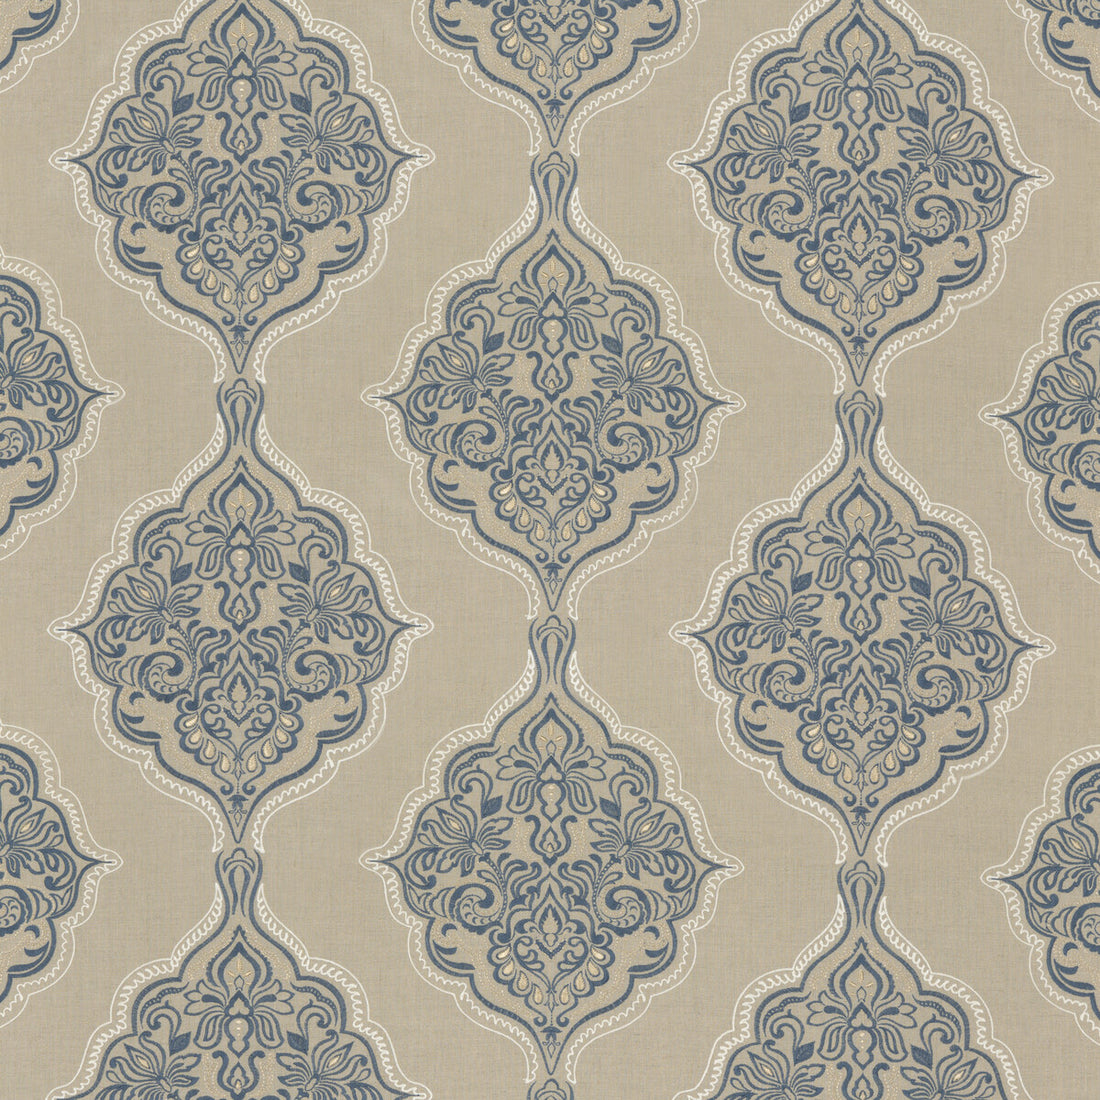 Montacute fabric in indigo color - pattern BF10767.2.0 - by G P &amp; J Baker in the Keswick Embroideries collection